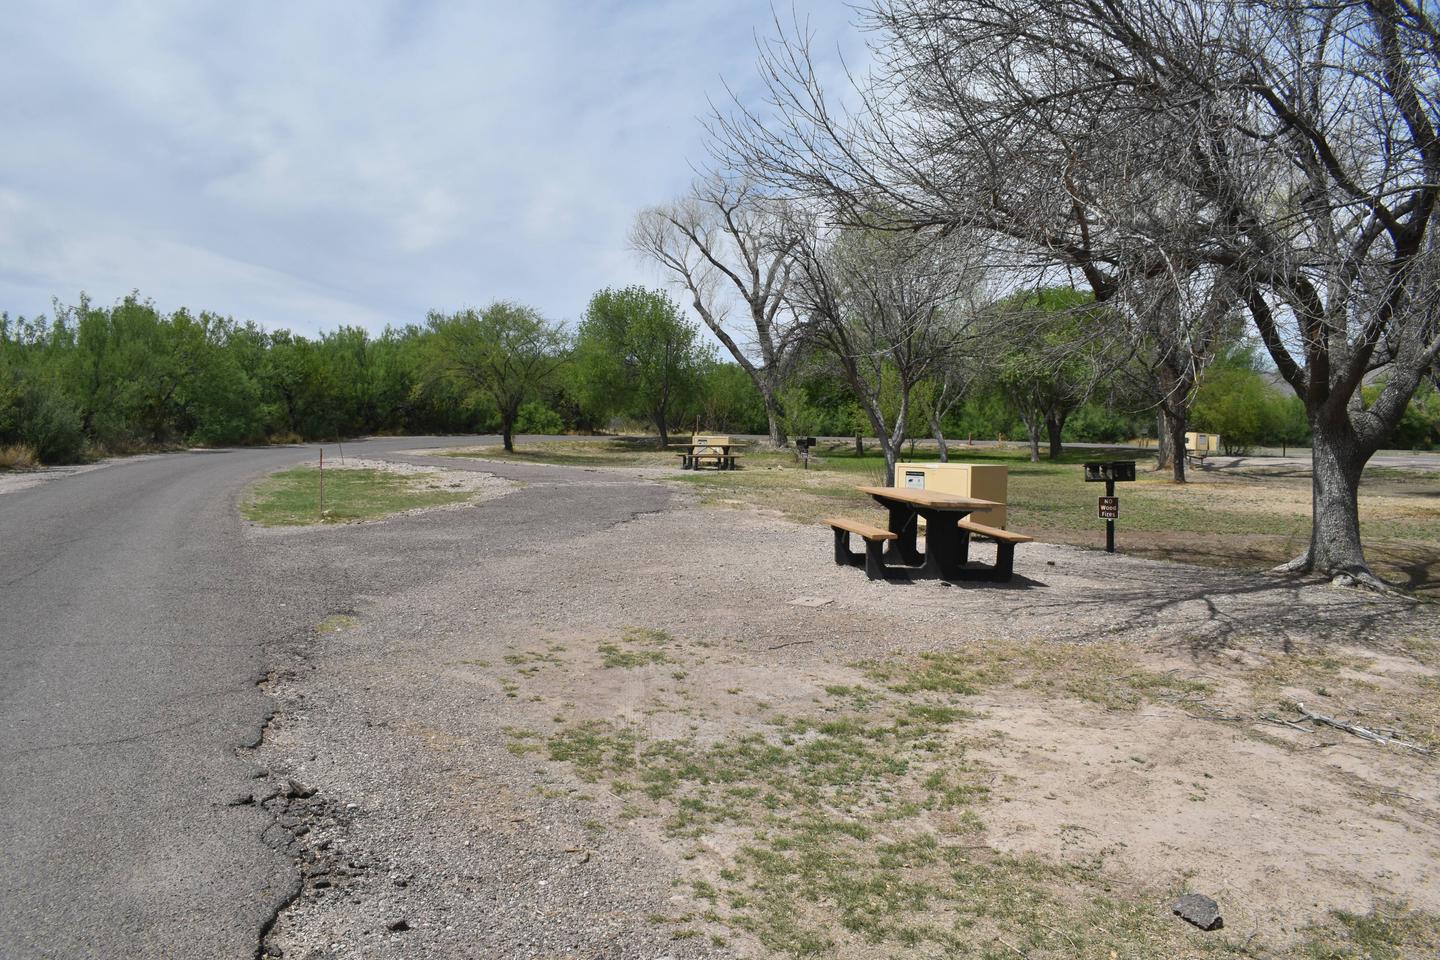 A long and paved pull-through driveway connects to the adjacent campsite, and provides ample parking for site two. A small, gravel space sits in-between the paved pull-through and the picnic table. The overview of Site 2